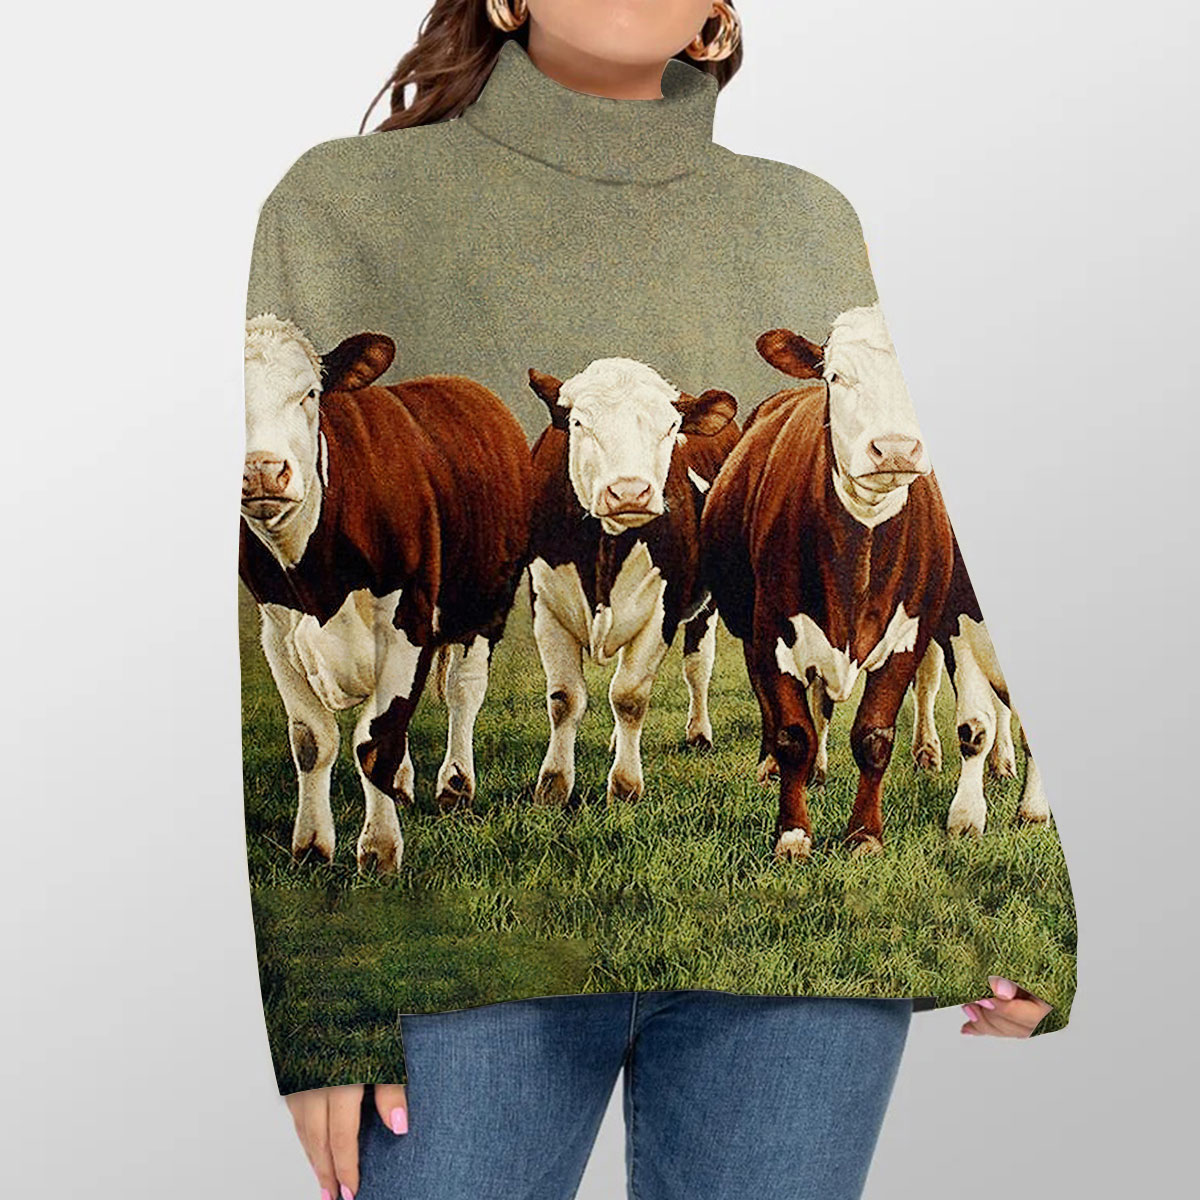 Four Cows Turtleneck Sweater